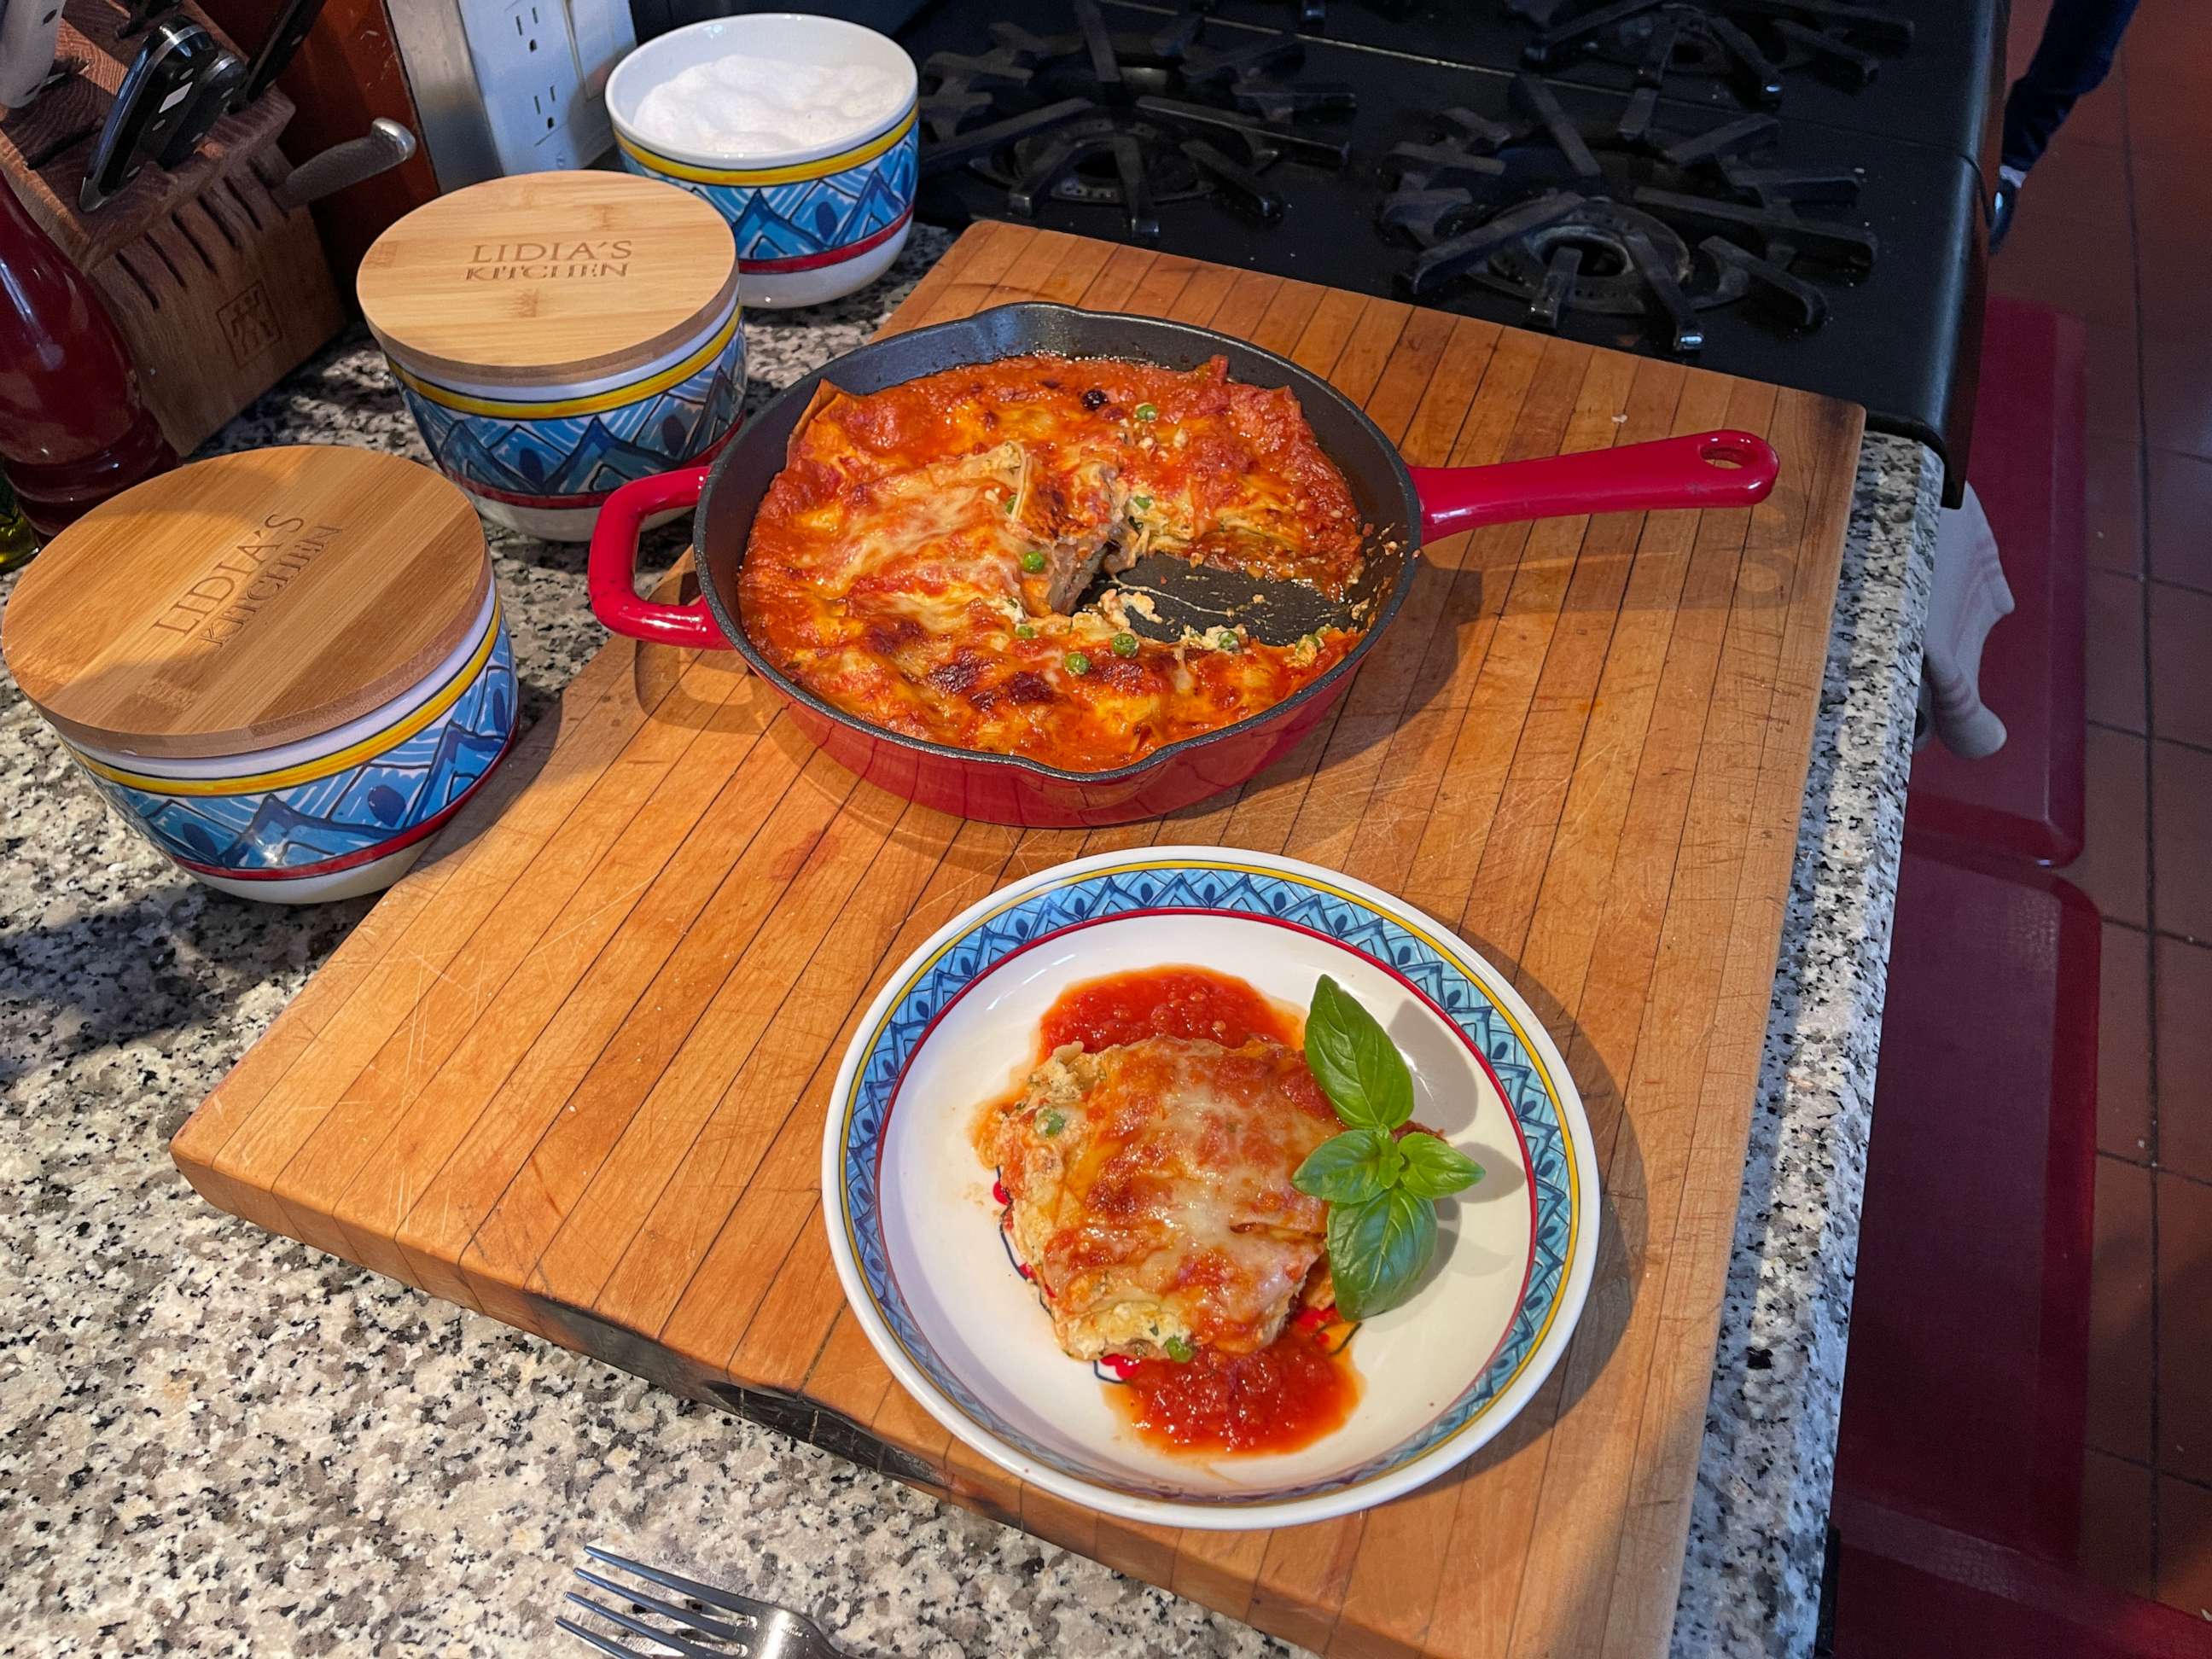 PHOTO: Lidia Bastianich's cast iron skillet lasagna made with her new cookware line.